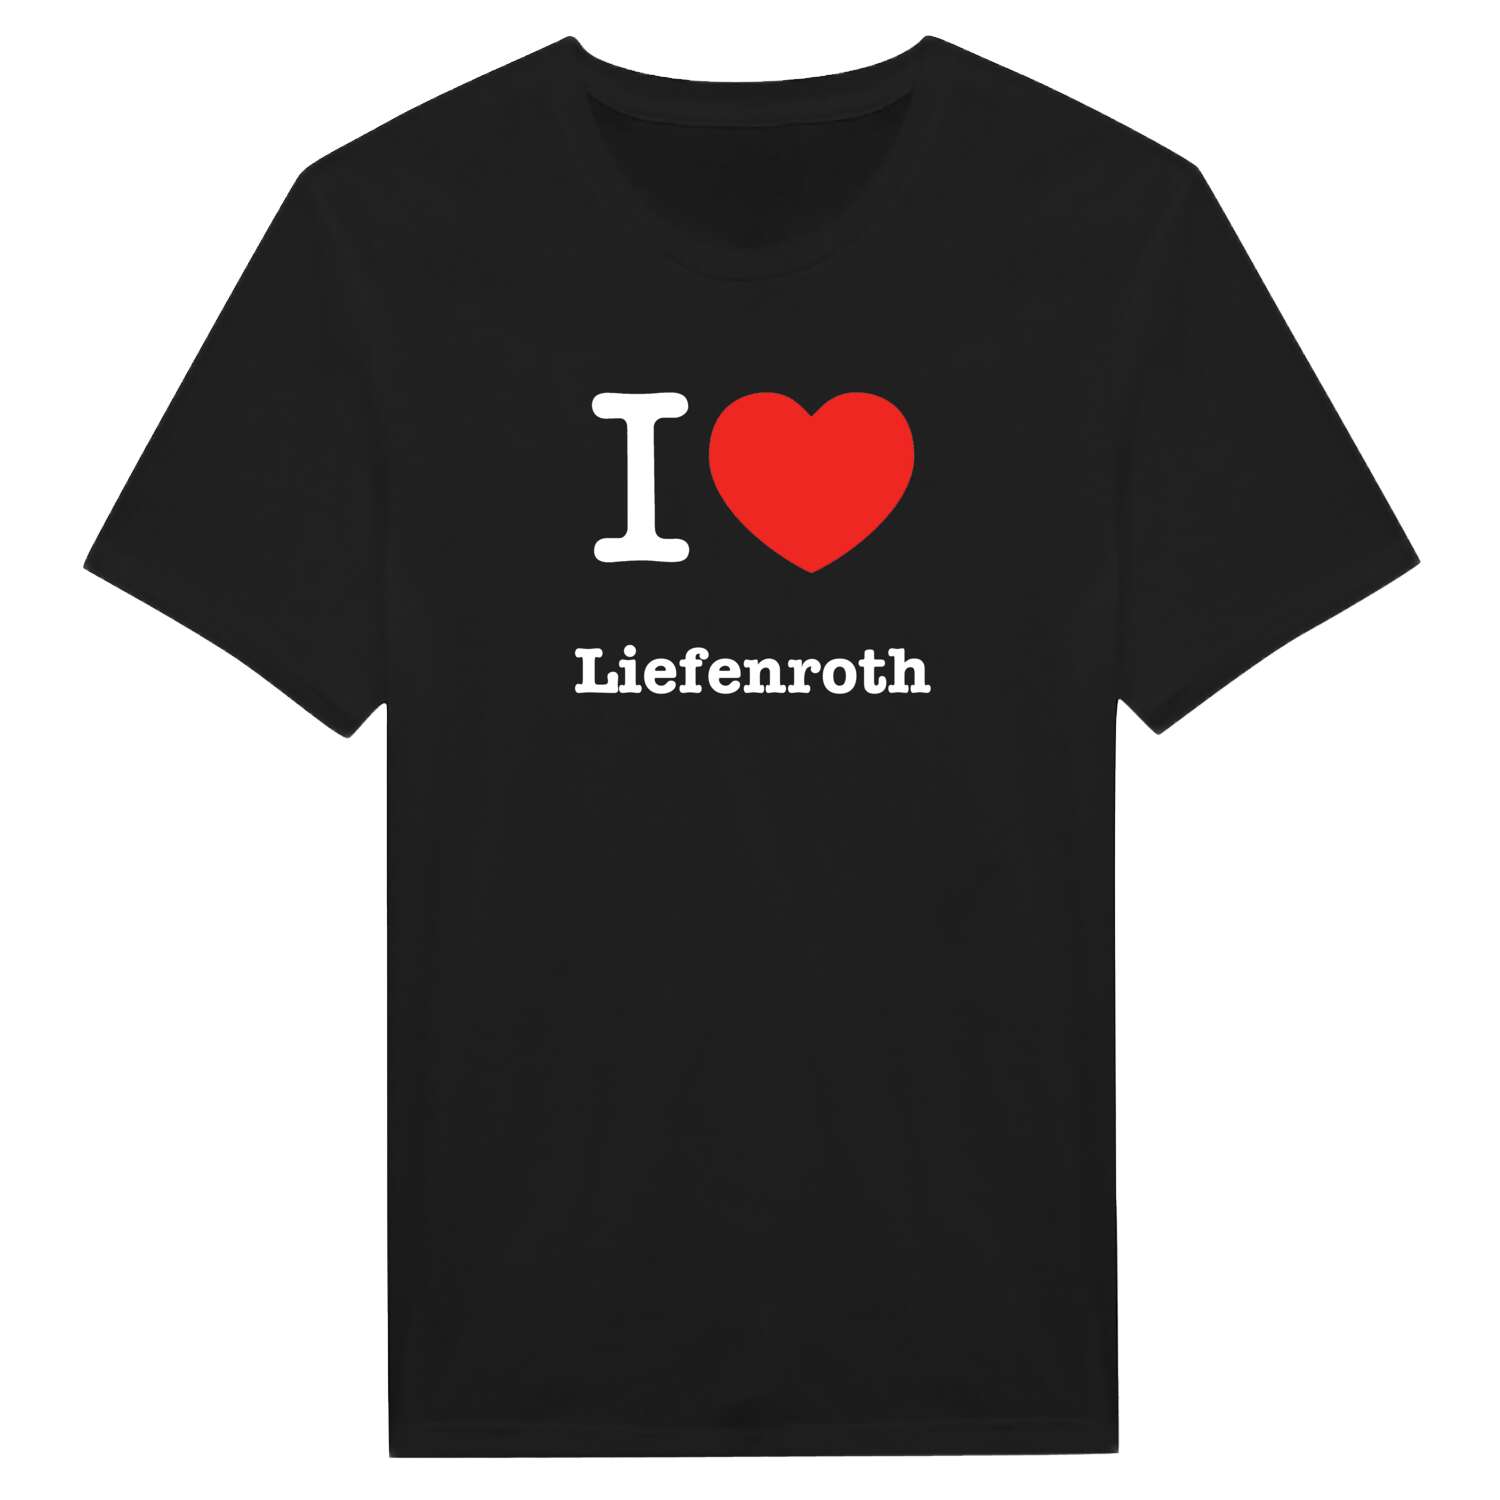 Liefenroth T-Shirt »I love«